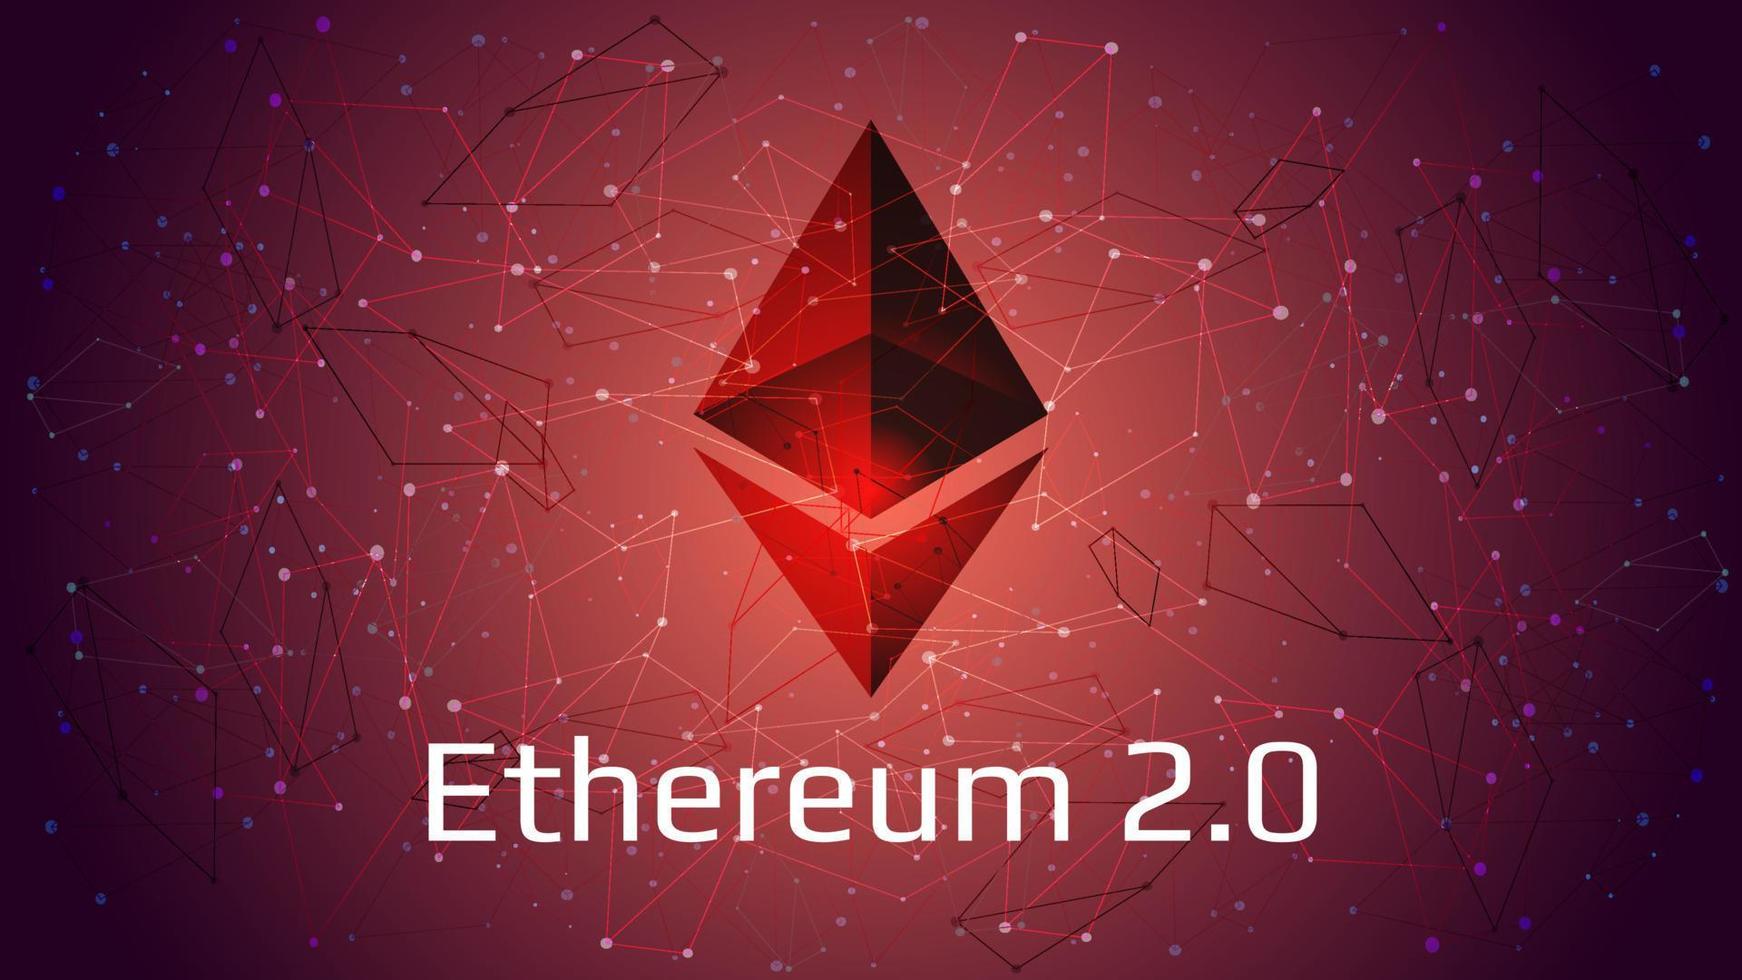 Ethereum 2.0 updated - cryptocurrency coin symbol on abstract polygonal red background. New direction after hard fork. Proof-of-Stake PoS consensus. Vector EPS10.